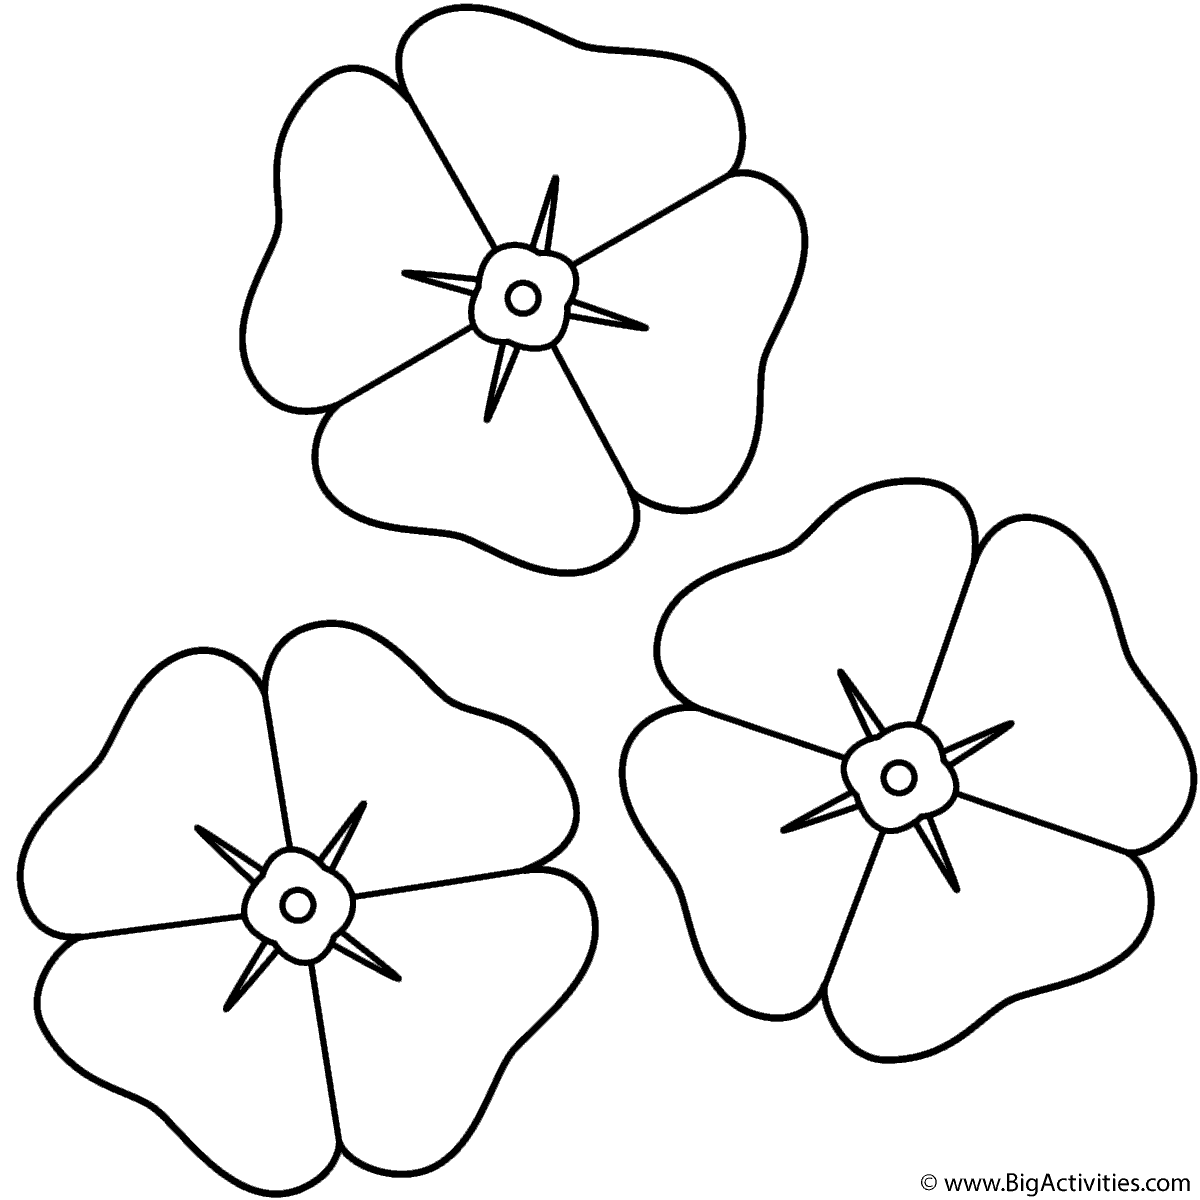 Poppies - Coloring Page (Memorial Day)